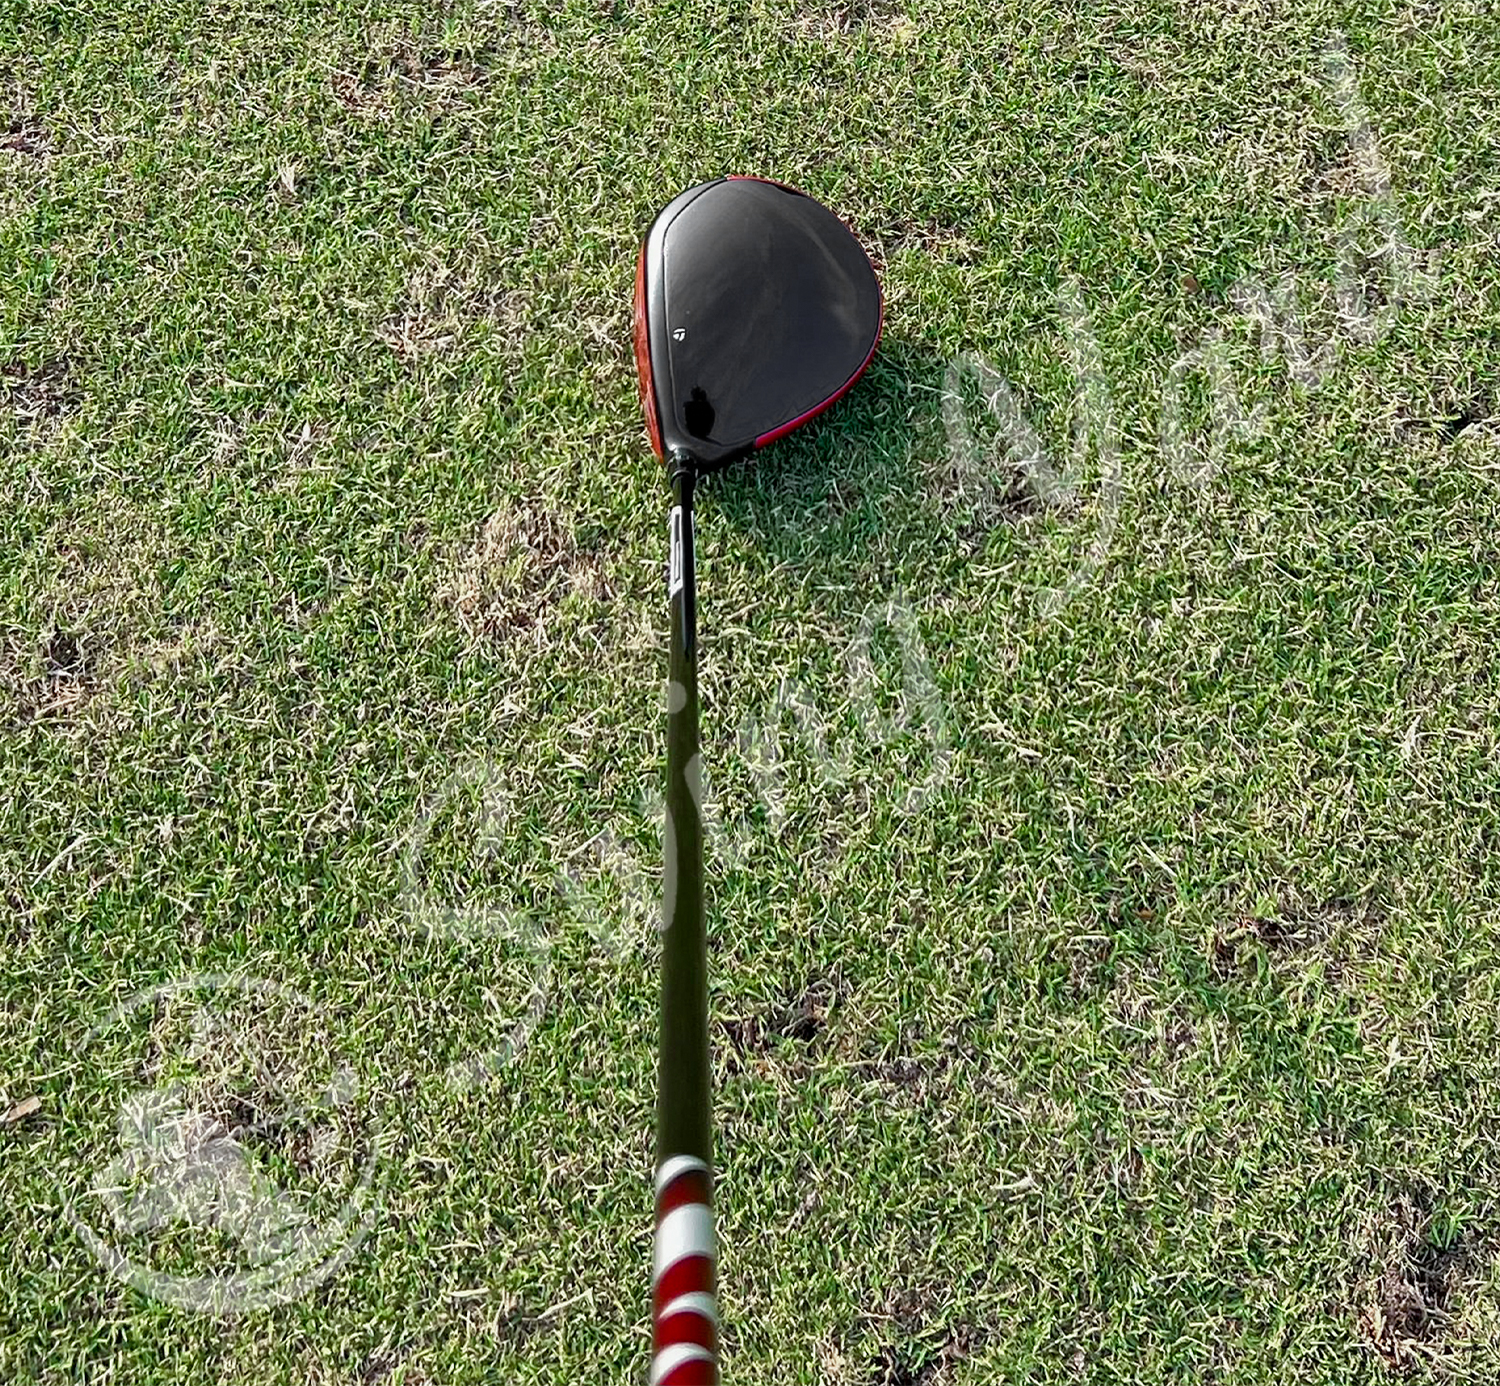 Showing the crown part of TaylorMade Stealth 2 driver in the grass